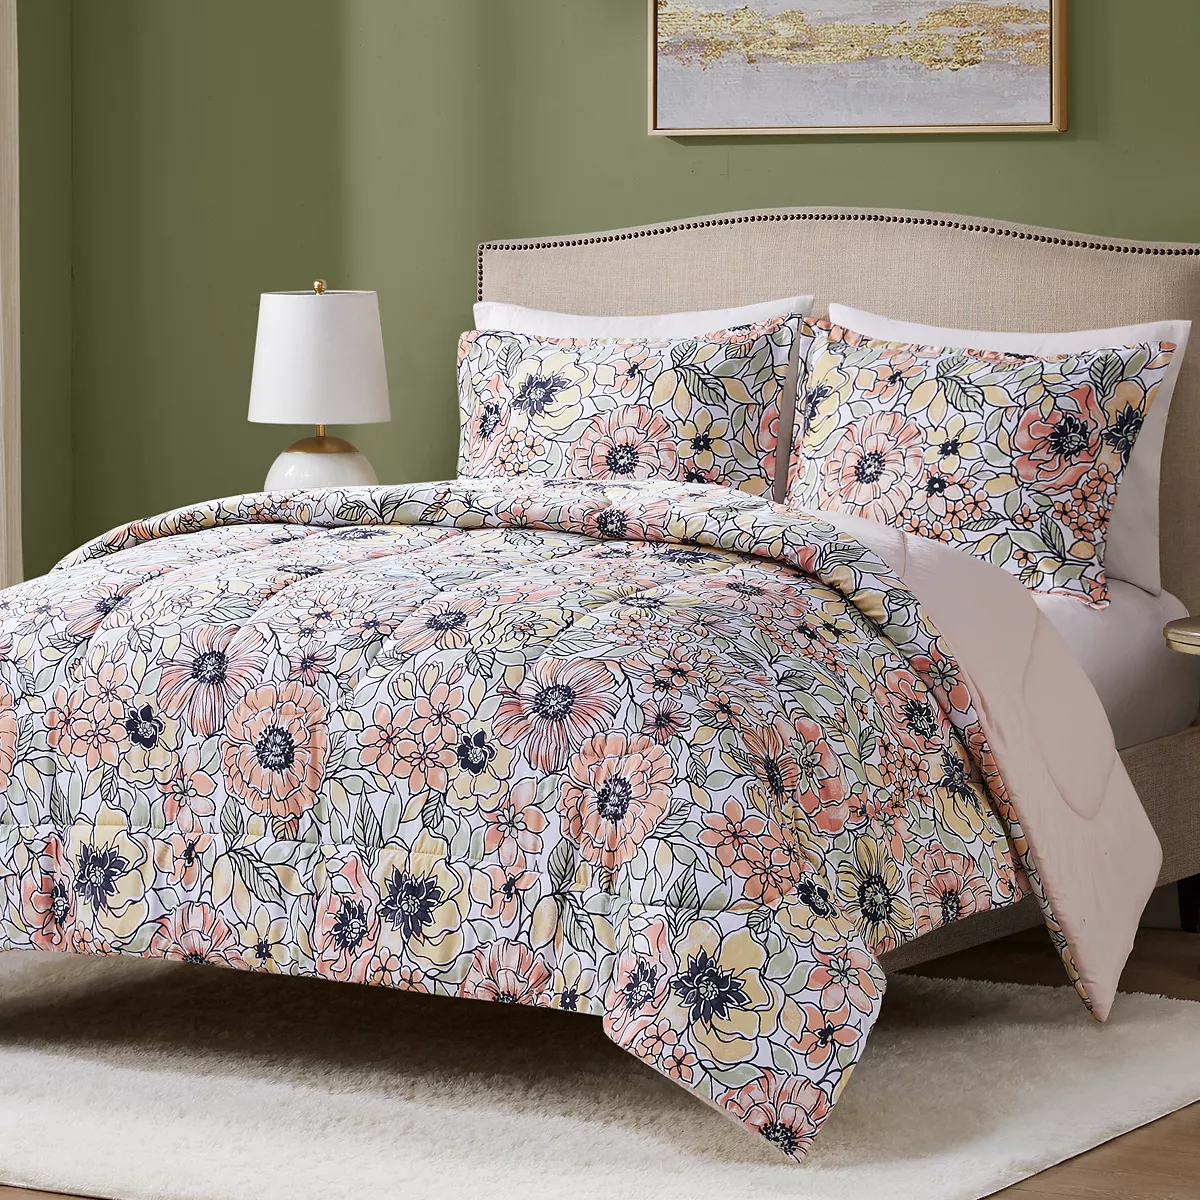 Floral patterned bedding set with duvet cover and pillowcases on a bed.